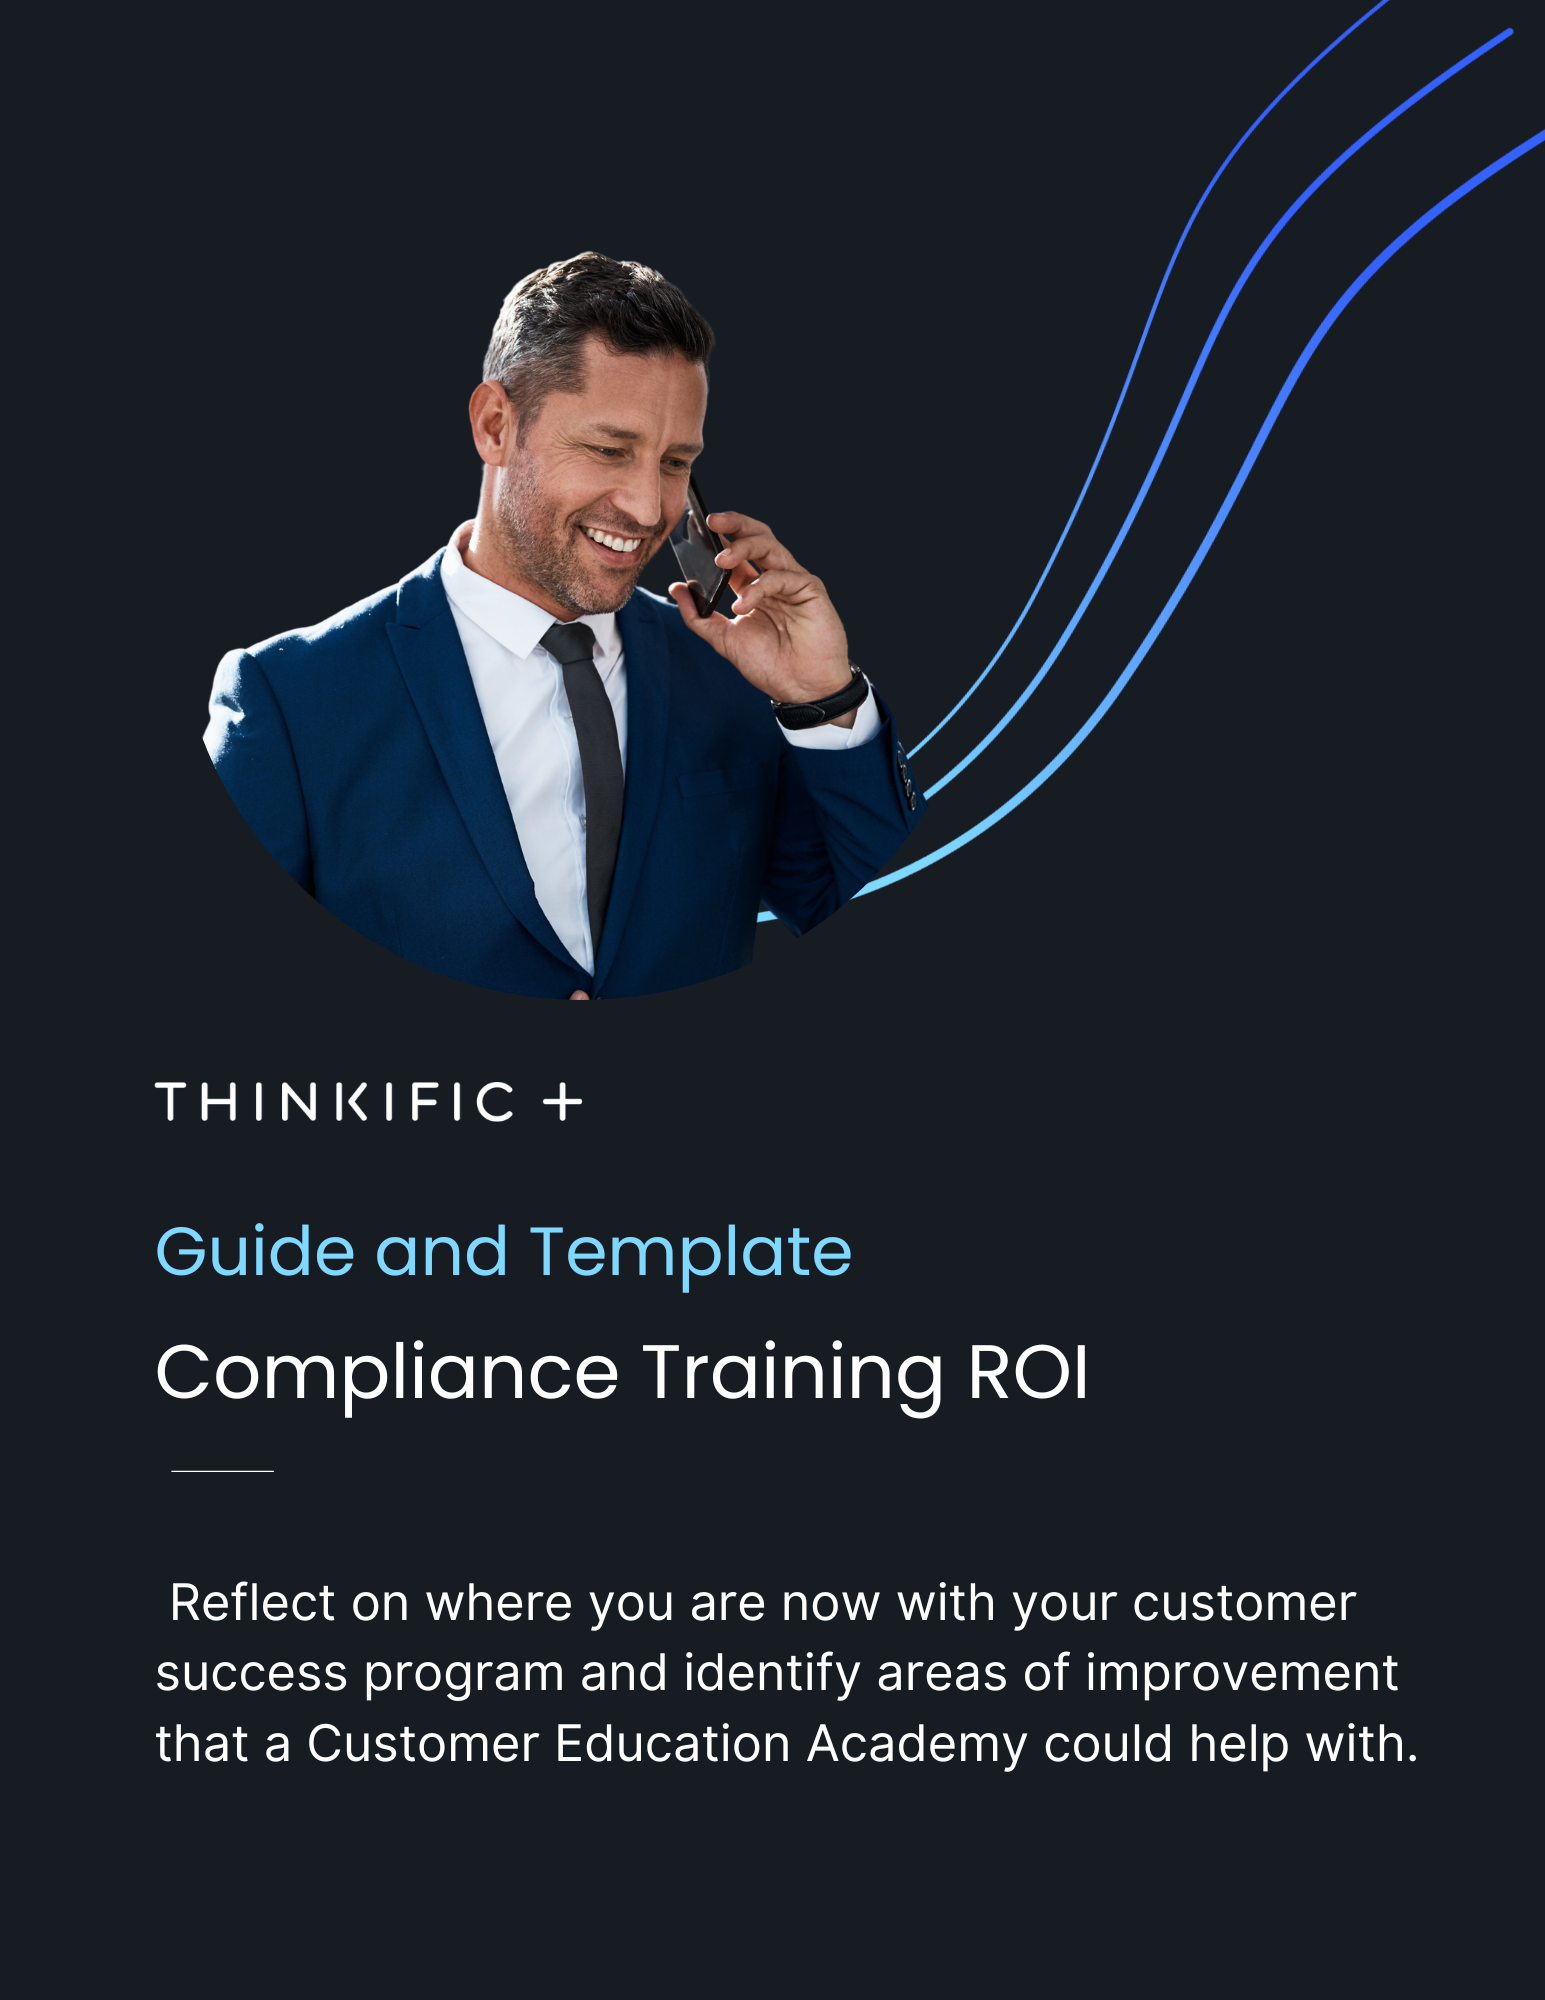 Free Compliance Training ROI Guide and Calculation Tool 